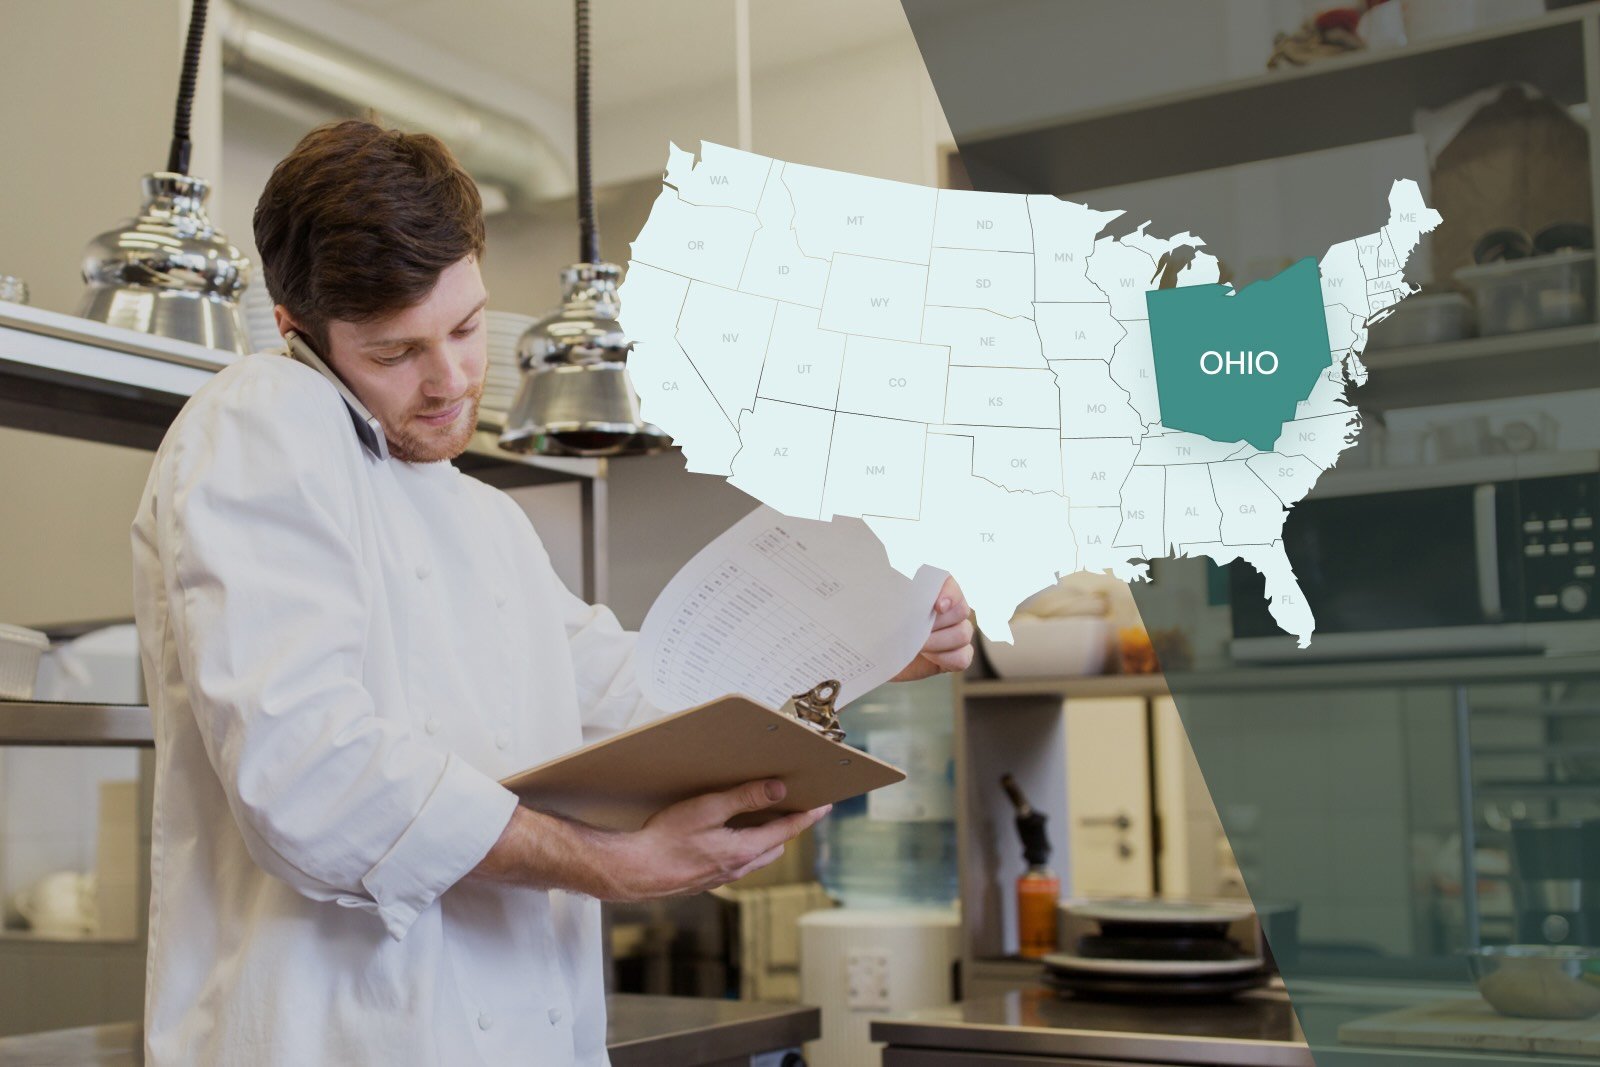 Food manager holding a clipboard in a kitchen with a map of the US that highlights Ohio